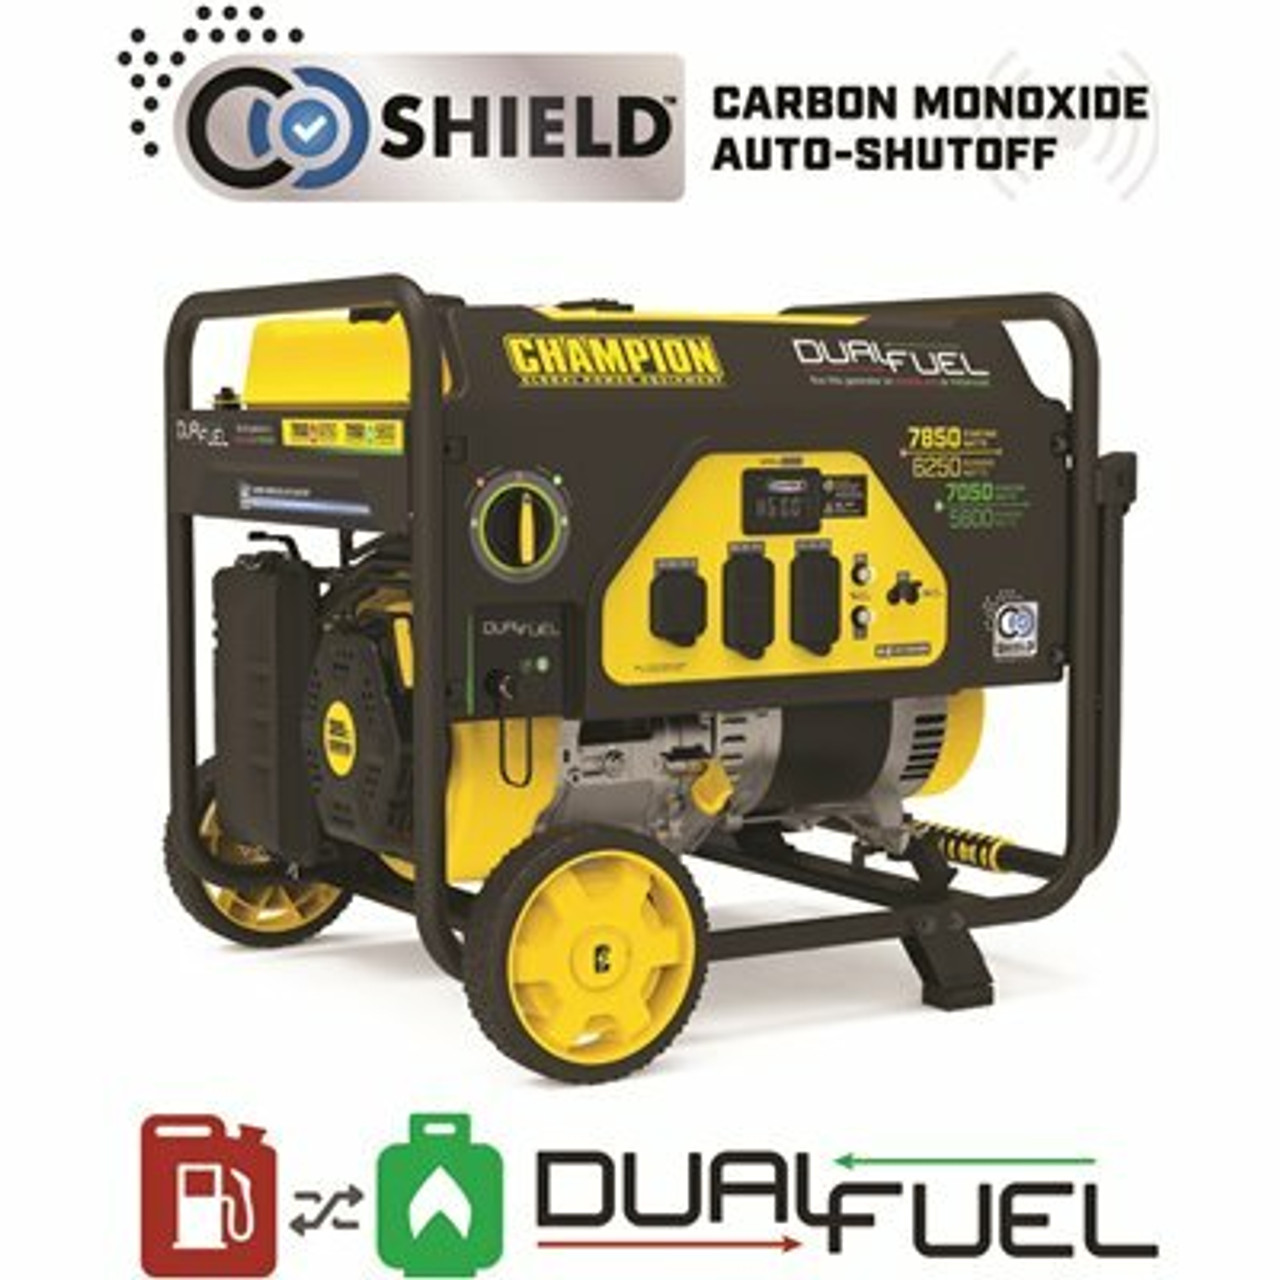 Champion Power Equipment 6250-Watt Gas And Propane Powered Dual-Fuel Portable Generator With Co Shield Technology